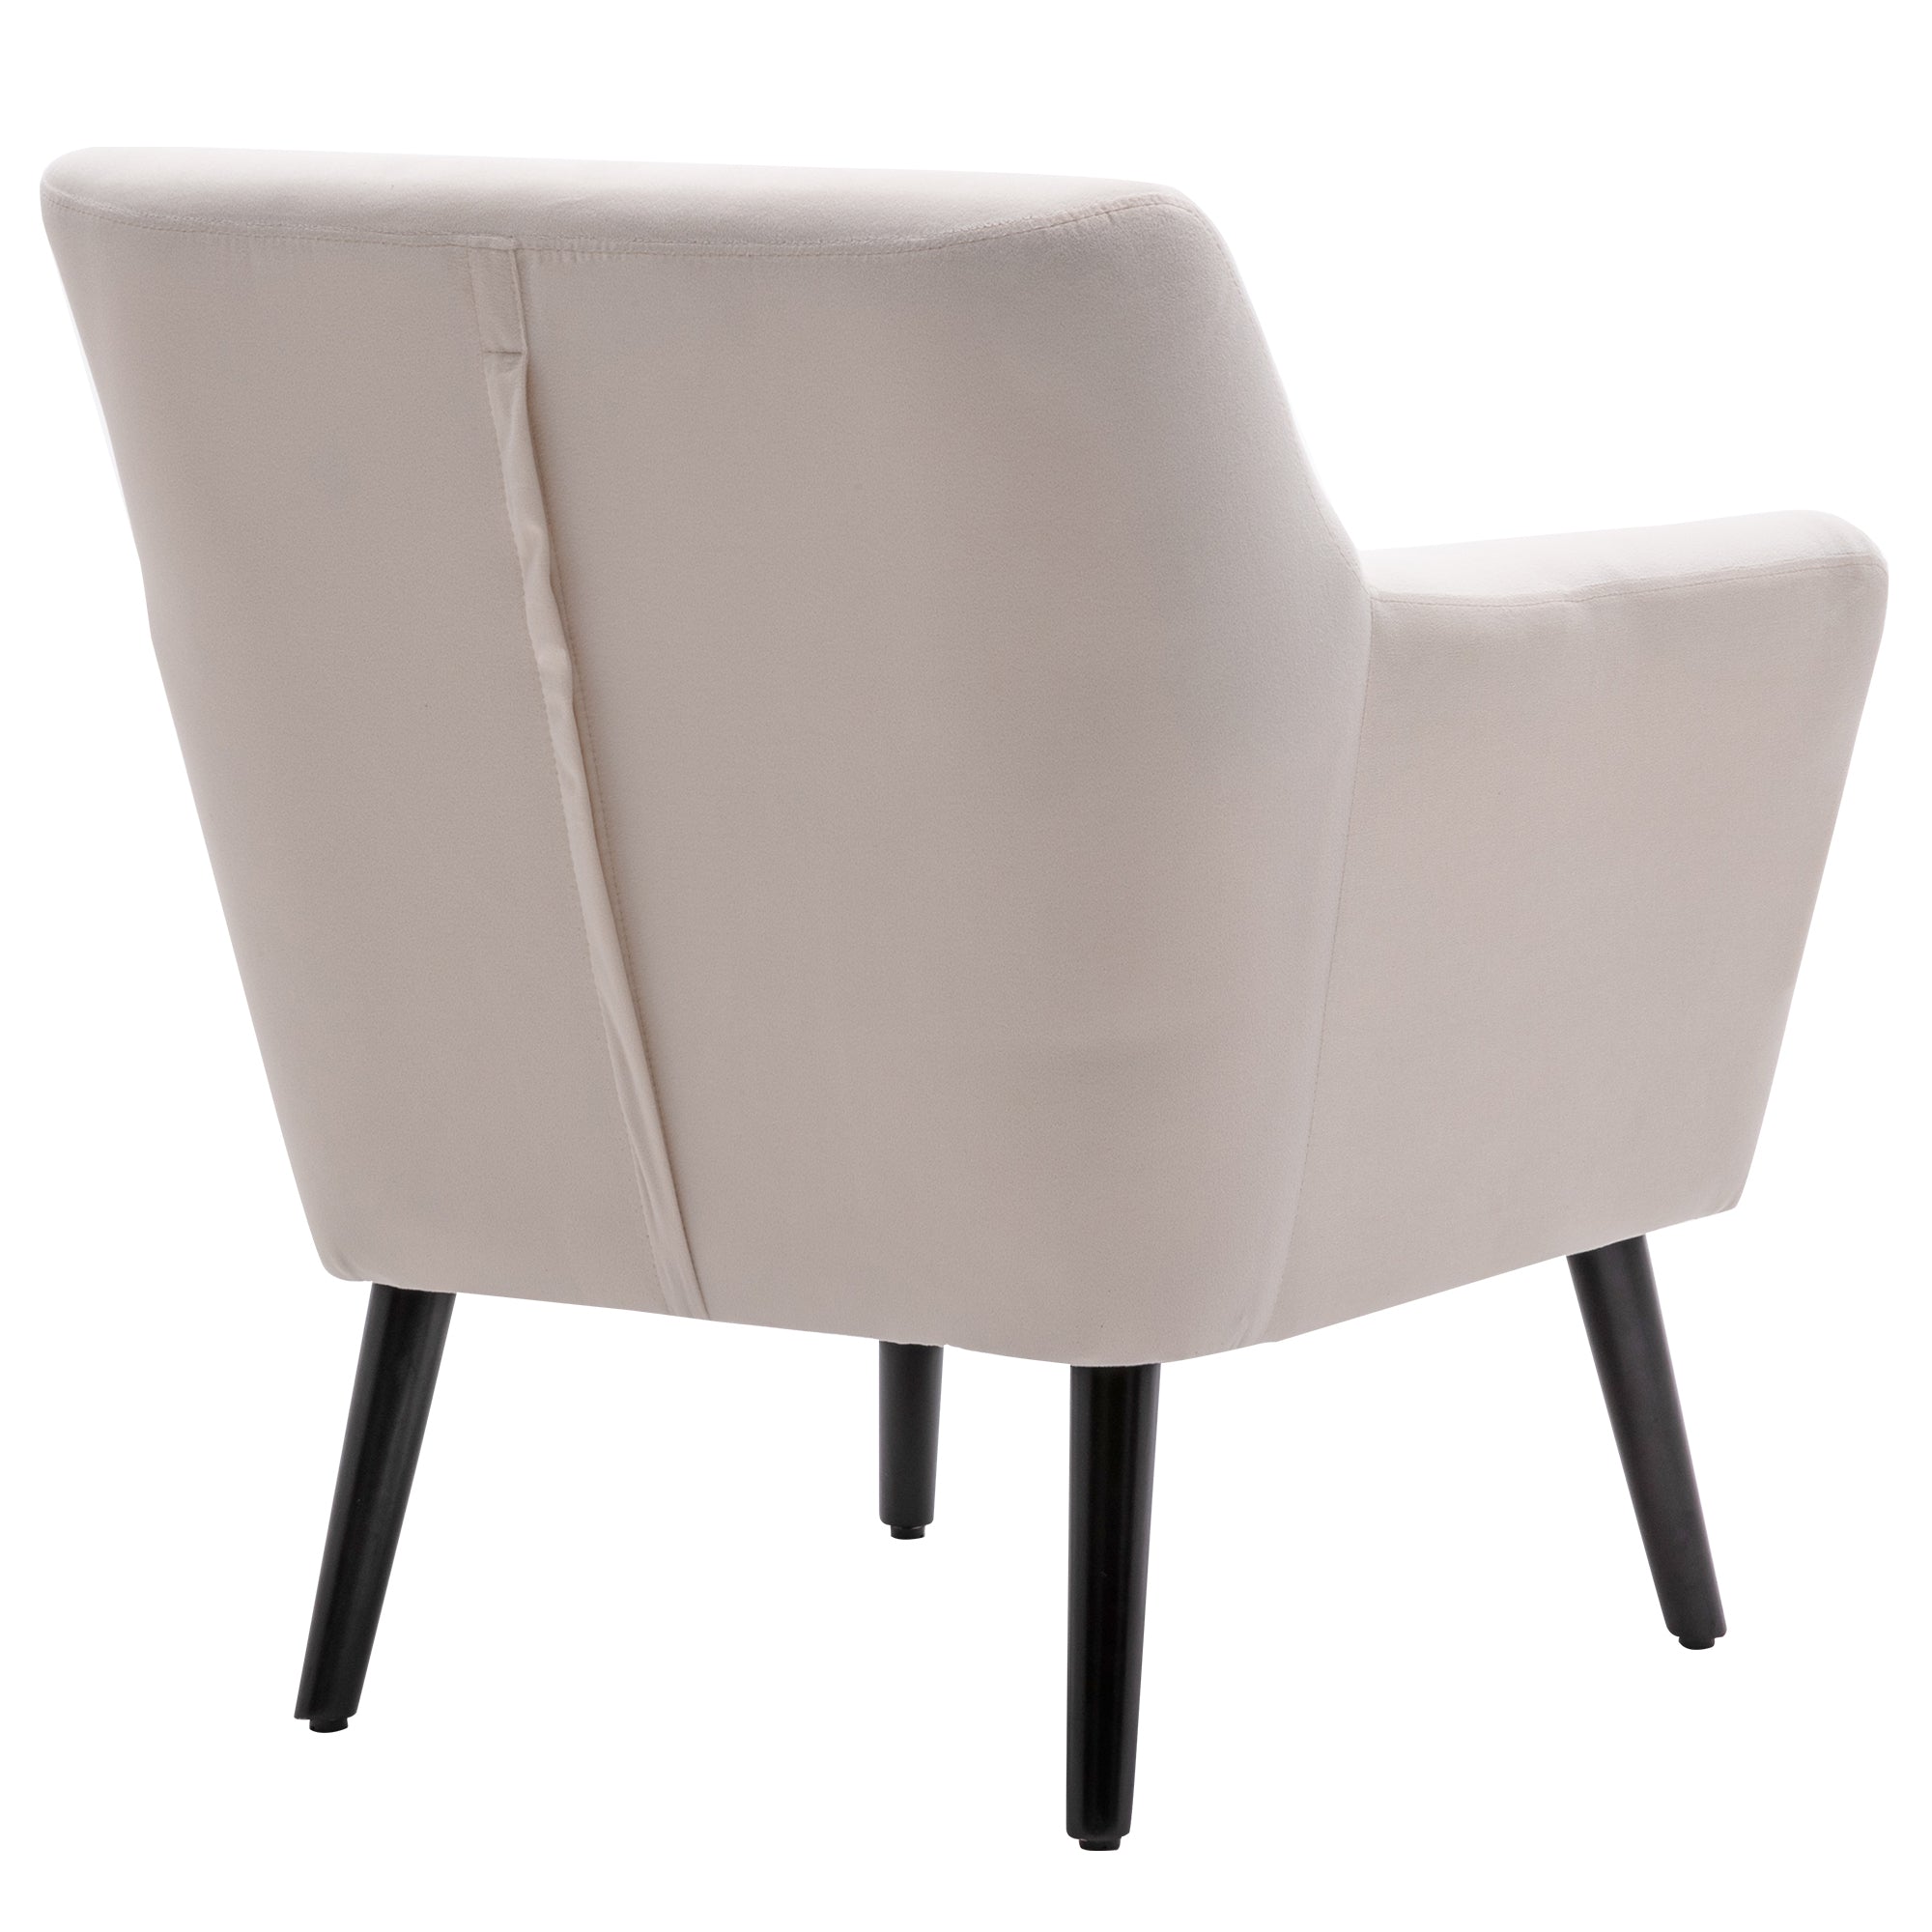 UCan Accenting Chair Chair with Pillow